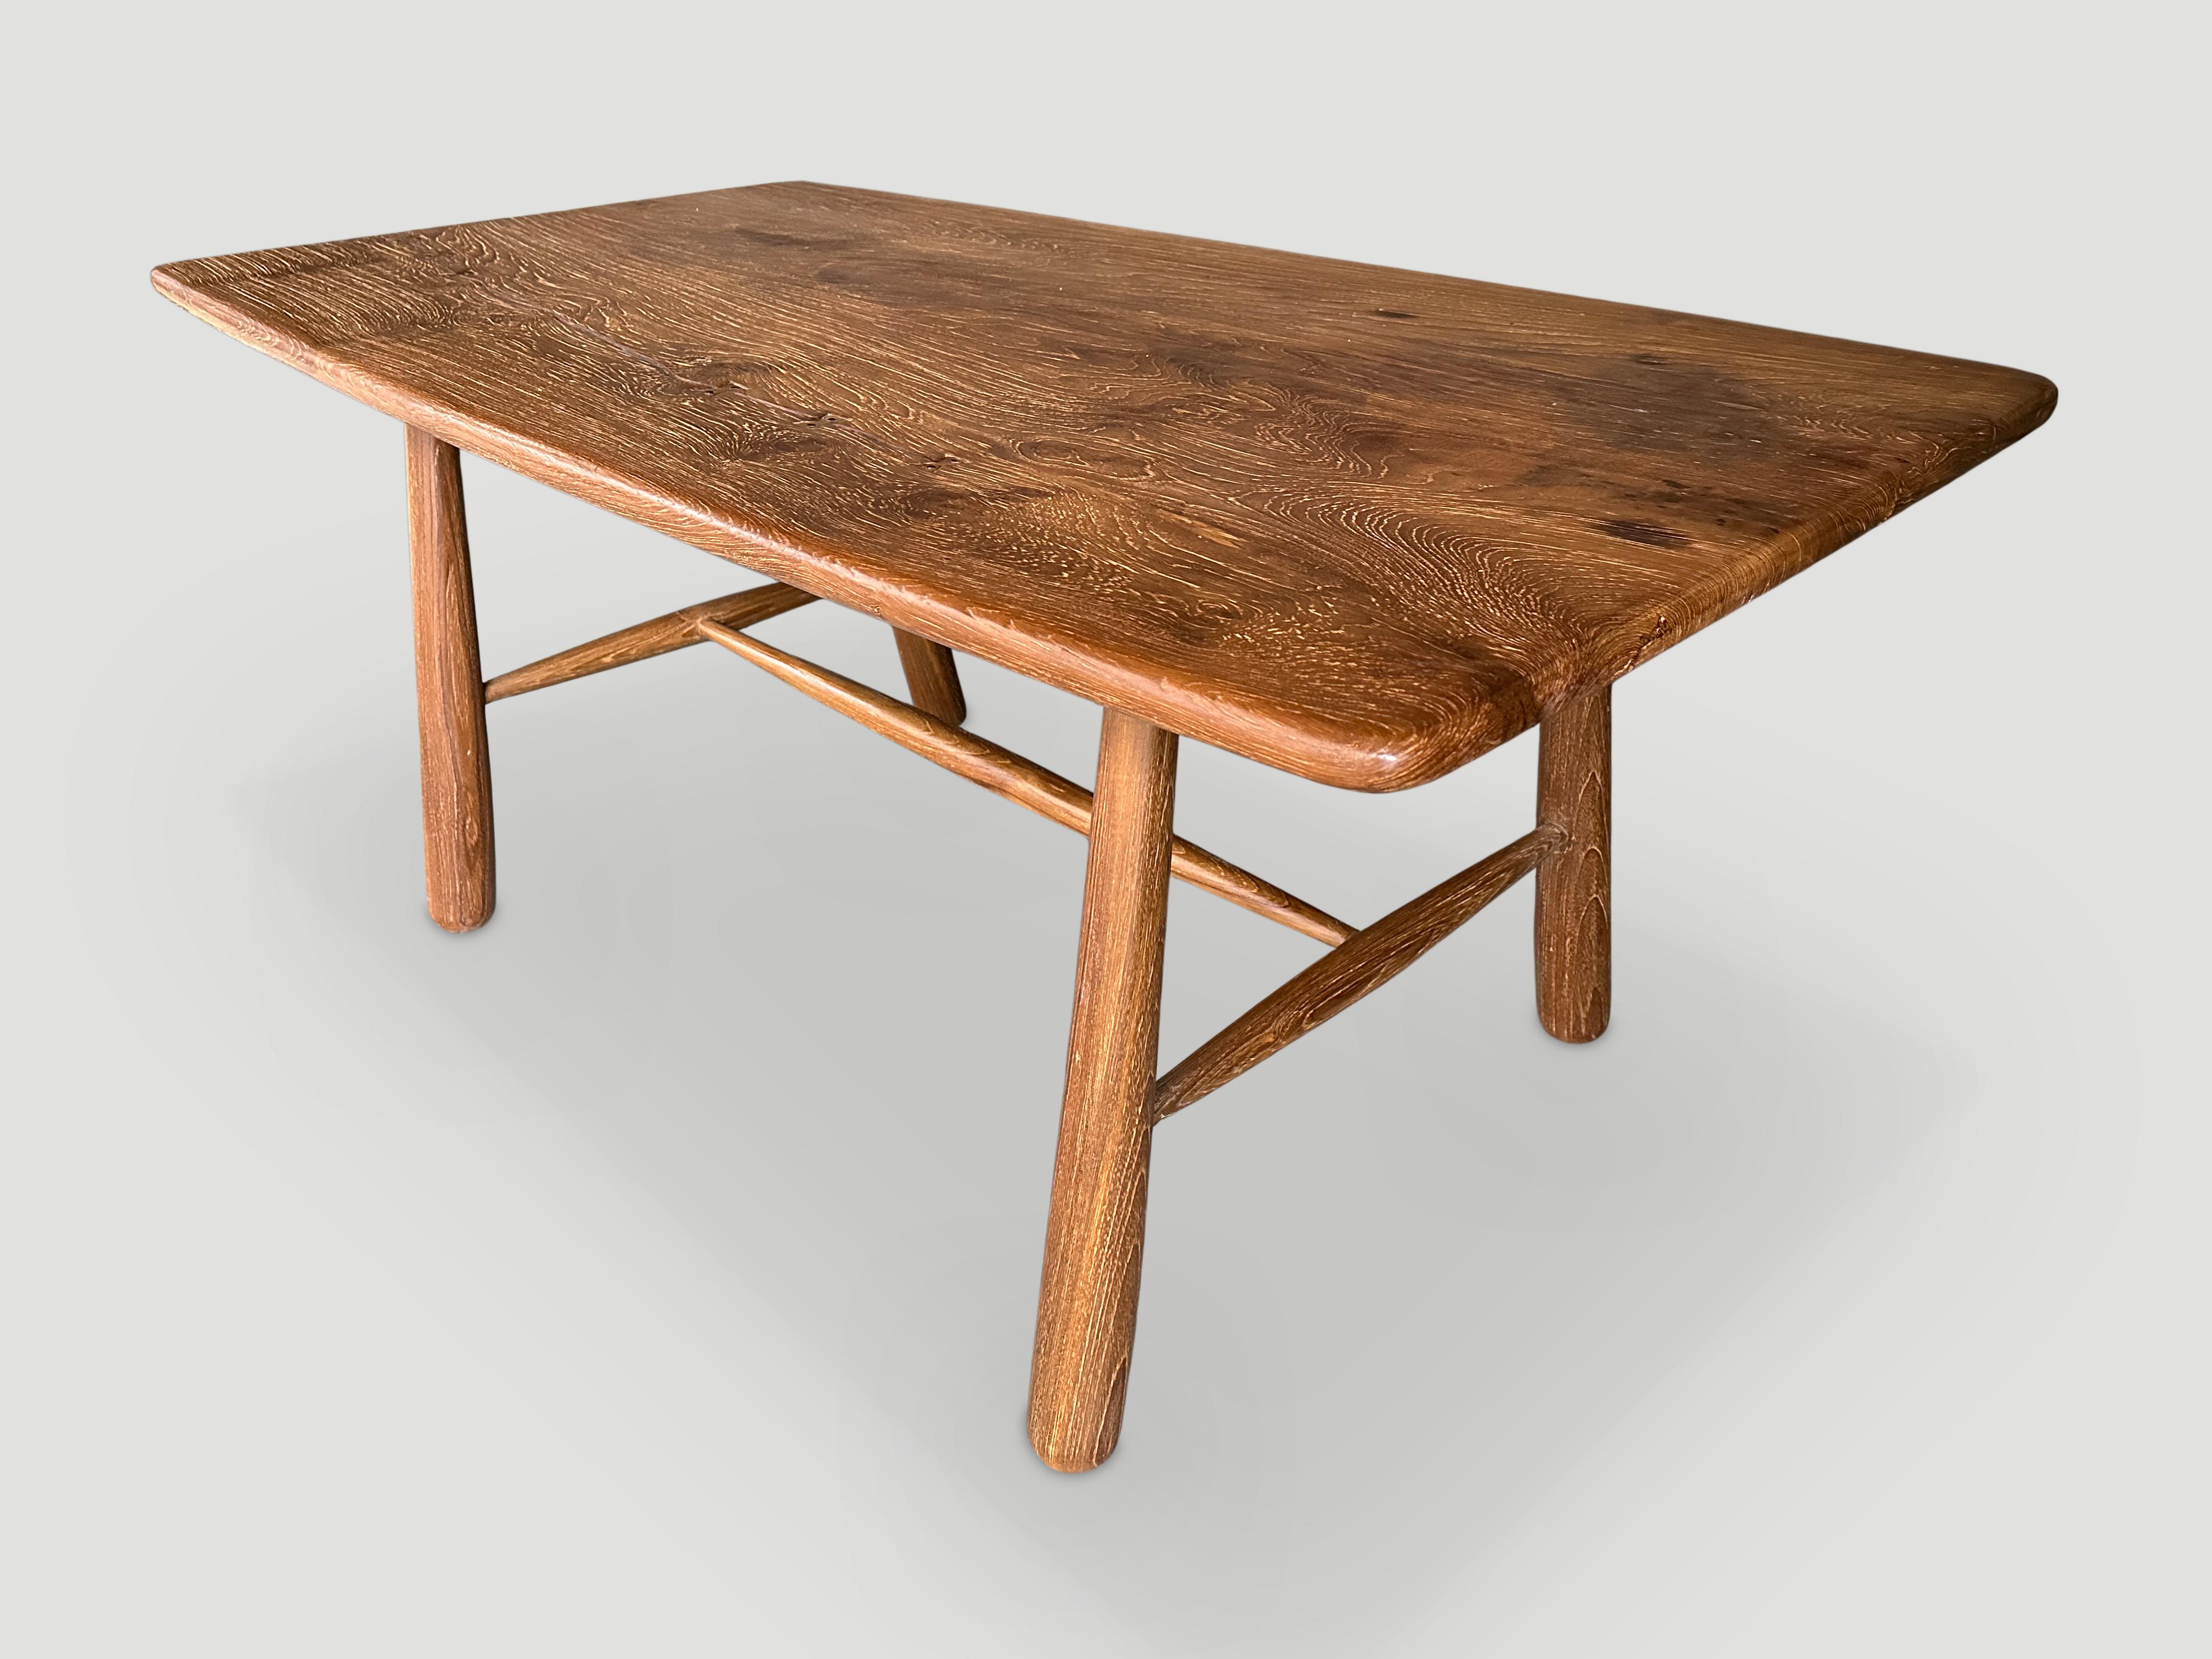 Introducing the midcentury Couture Collection. Furniture constructed by hand from start to finish. Impressive single slab of teak wood taken from my finest collection is hand carved and bevelled on the sides to produce this impressive dining table